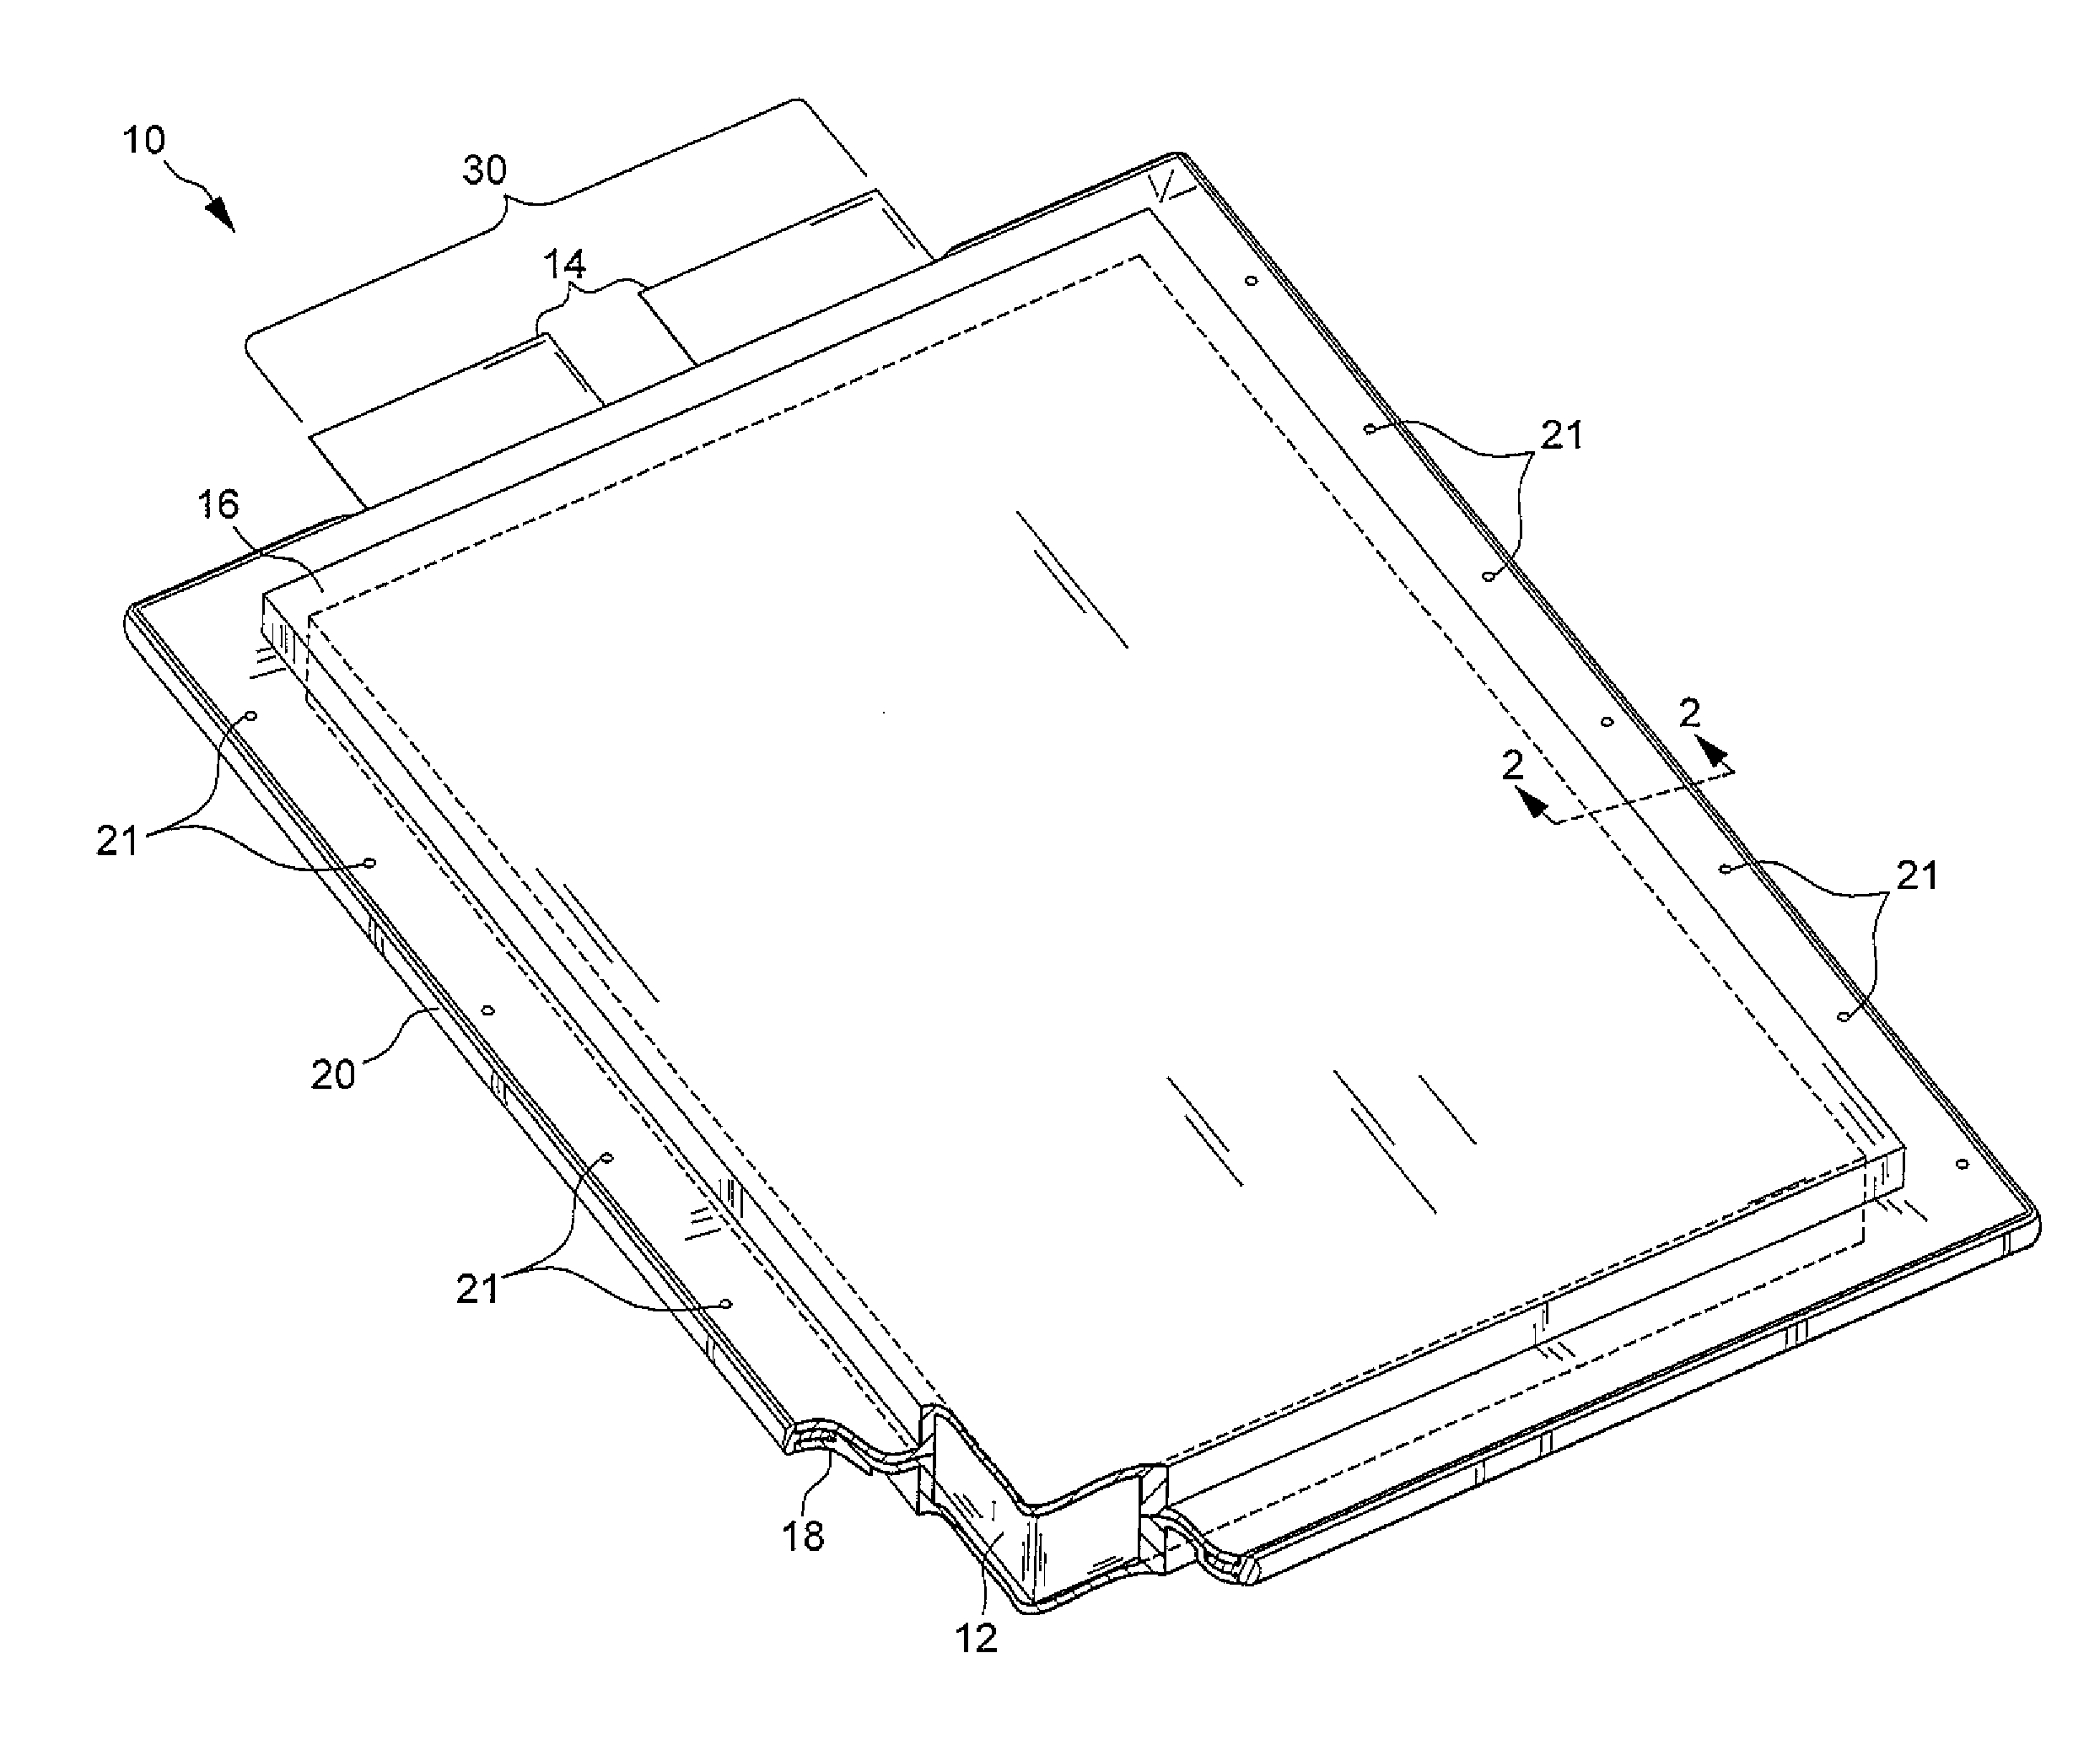 Extended range electric vehicle battery cell packaging for pouch design